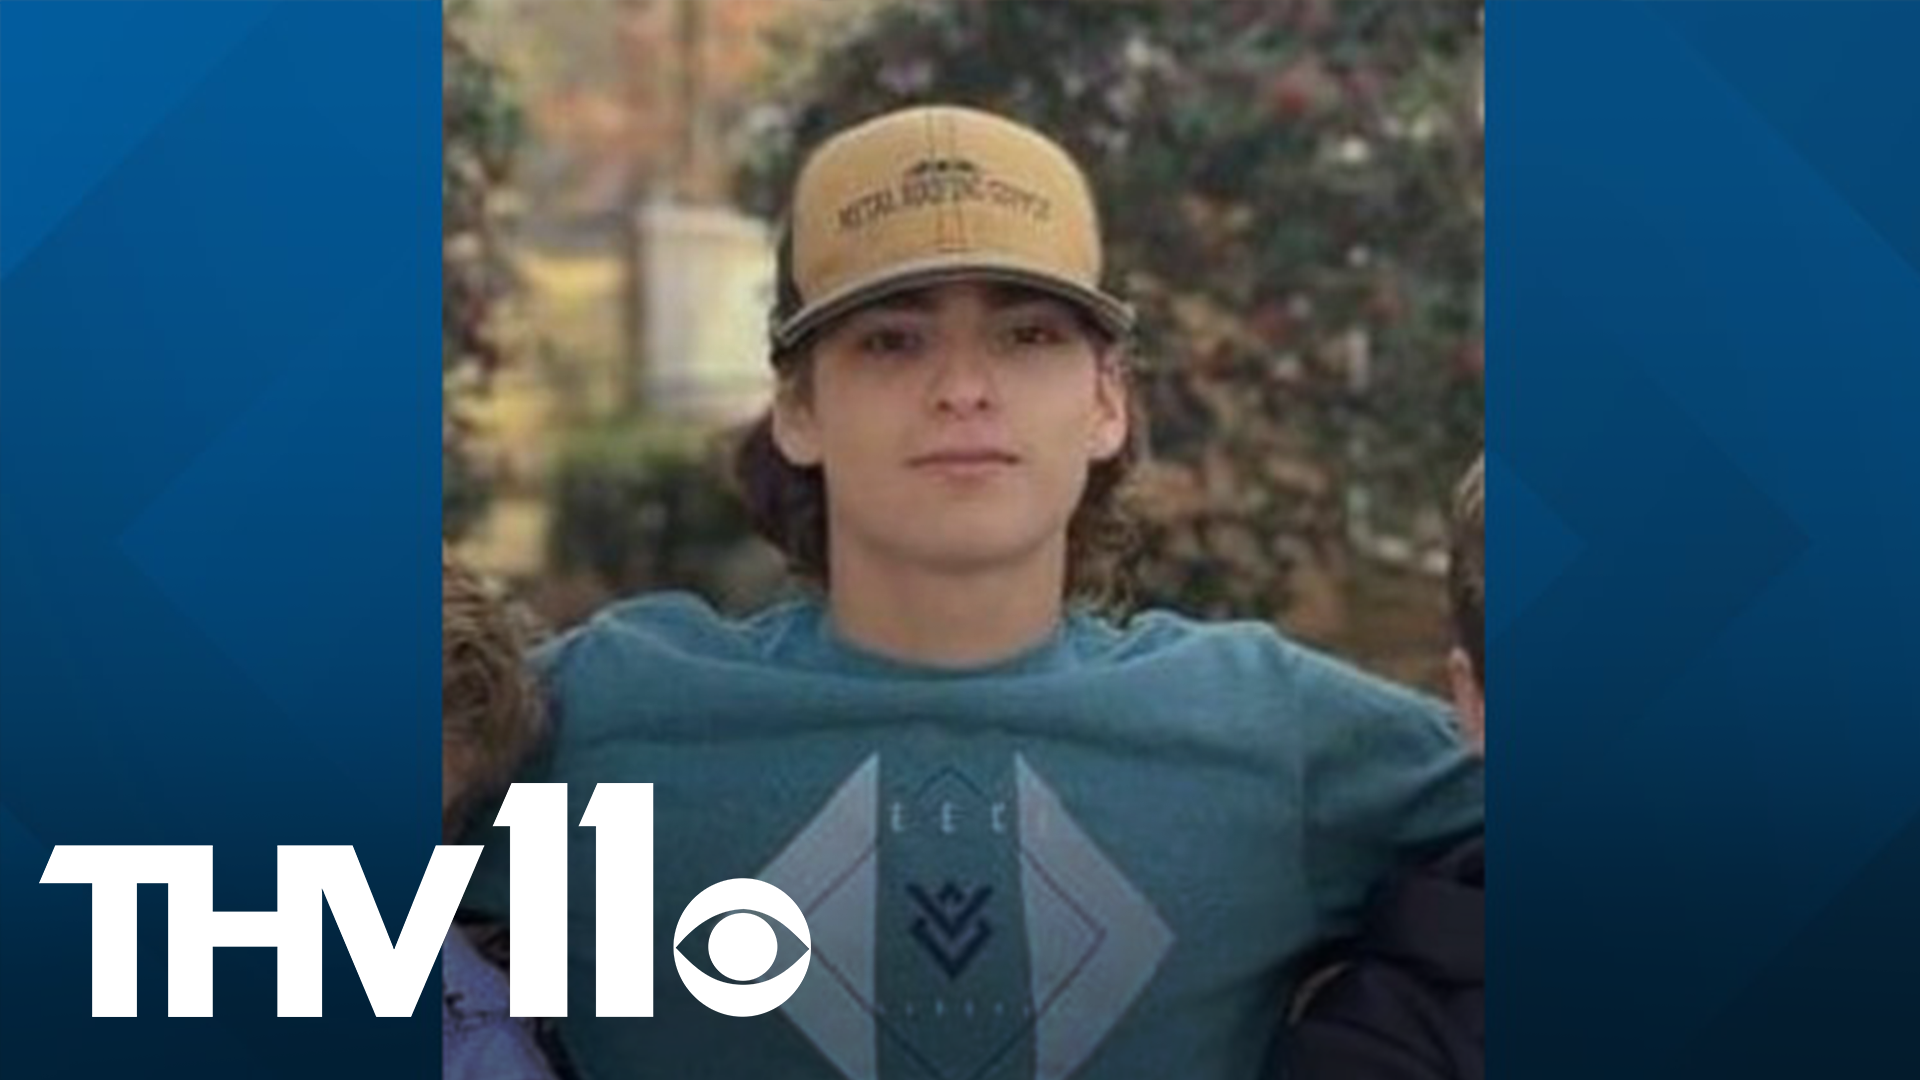 According to family, 17-year-old Hunter Britain was shot and killed during a traffic stop. Family says he'd been working on a transmission and went on a test drive.